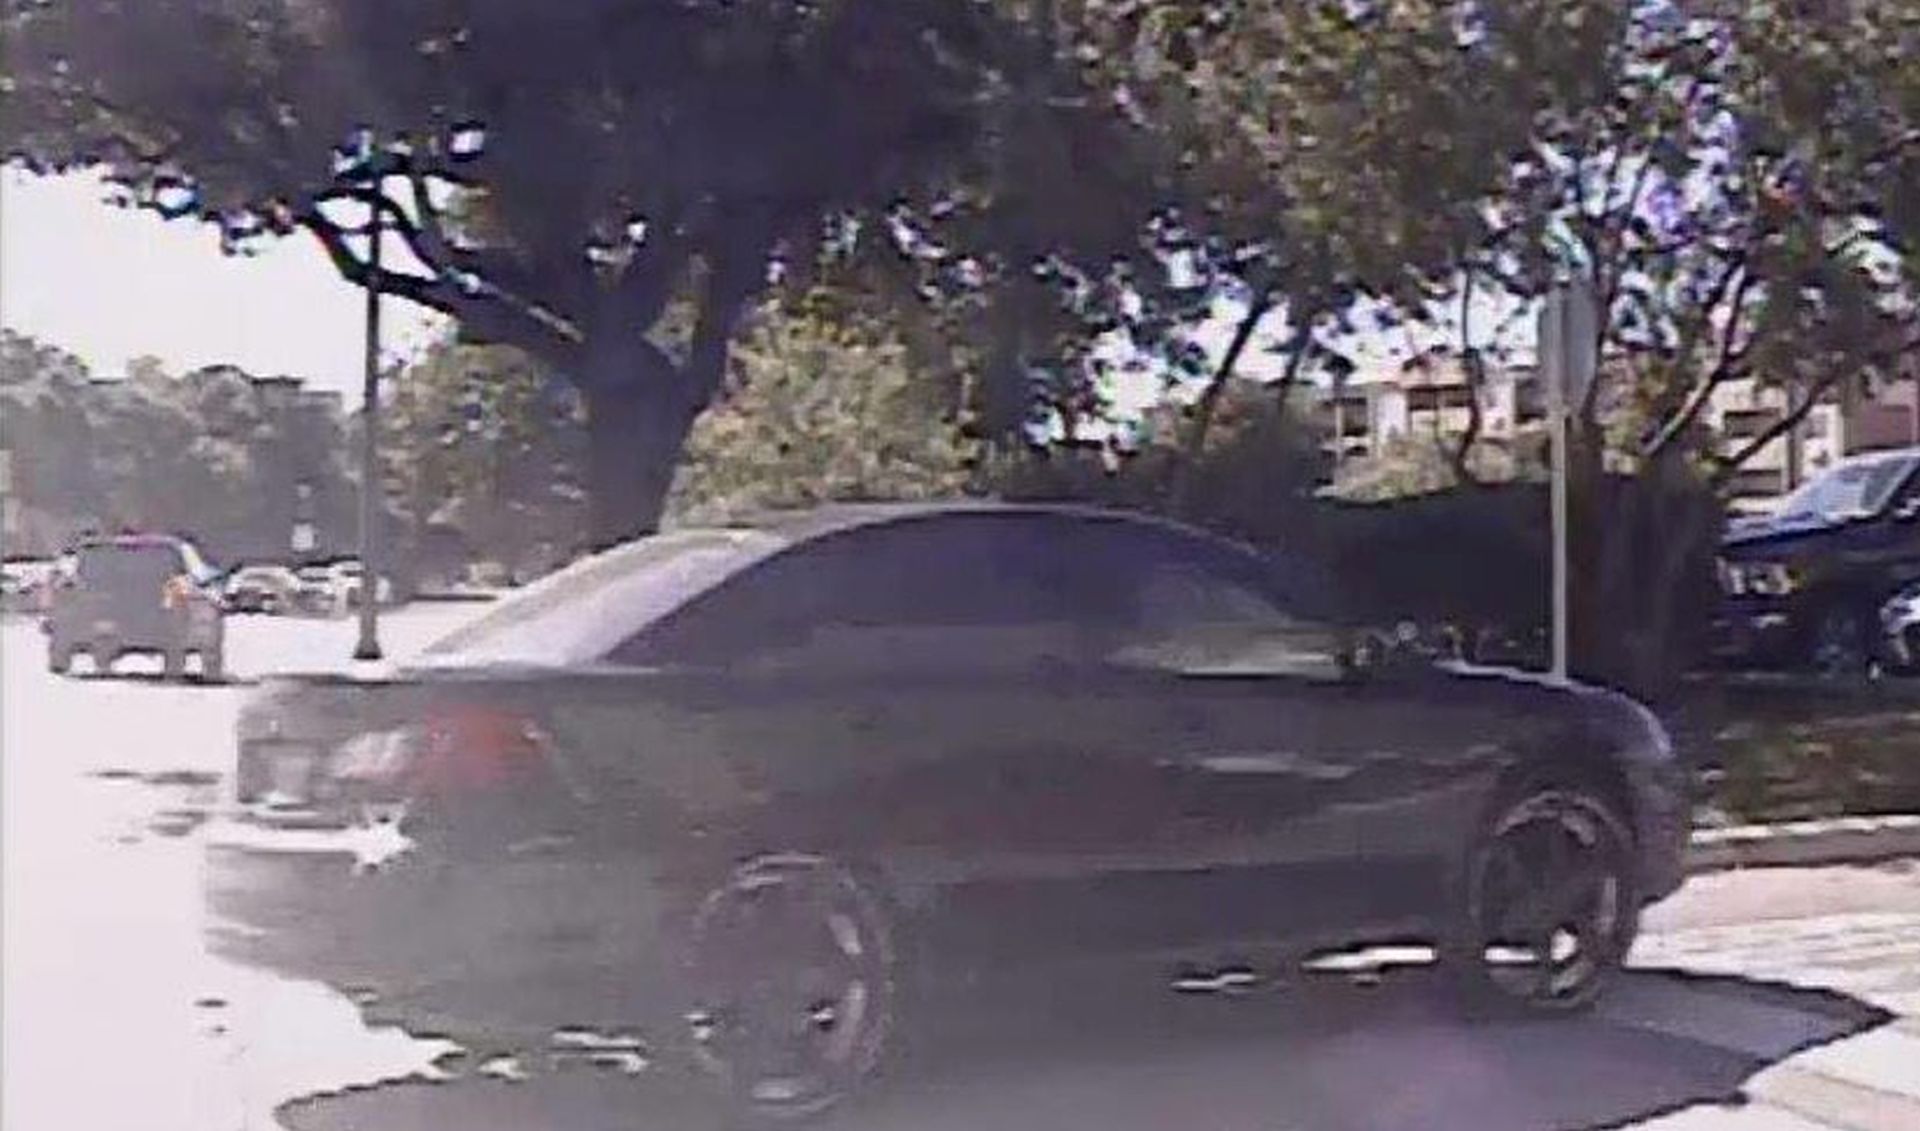 epa05640740 An undated handout photograph made available on 21 November 2016 by the San Antonio Police Department (SAPD), Texas, USA, showing a black 2009-2015 Mitsubishi Galant with custom rims that is believed to be the suspects vehicle in connection in the fatal shooting of Detective Benjamin Marconi. The SAPD state that they are looking for a suspect in connection with the shooting of Detective Marconi who was killed while writing a traffic ticket outside Public Safety Headquarters on 20 November 2016.  EPA/SAN ANTONIO POLICE DEPARTMENT / HANDOUT BEST QUALITY AVAILABLE HANDOUT EDITORIAL USE ONLY/NO SALES